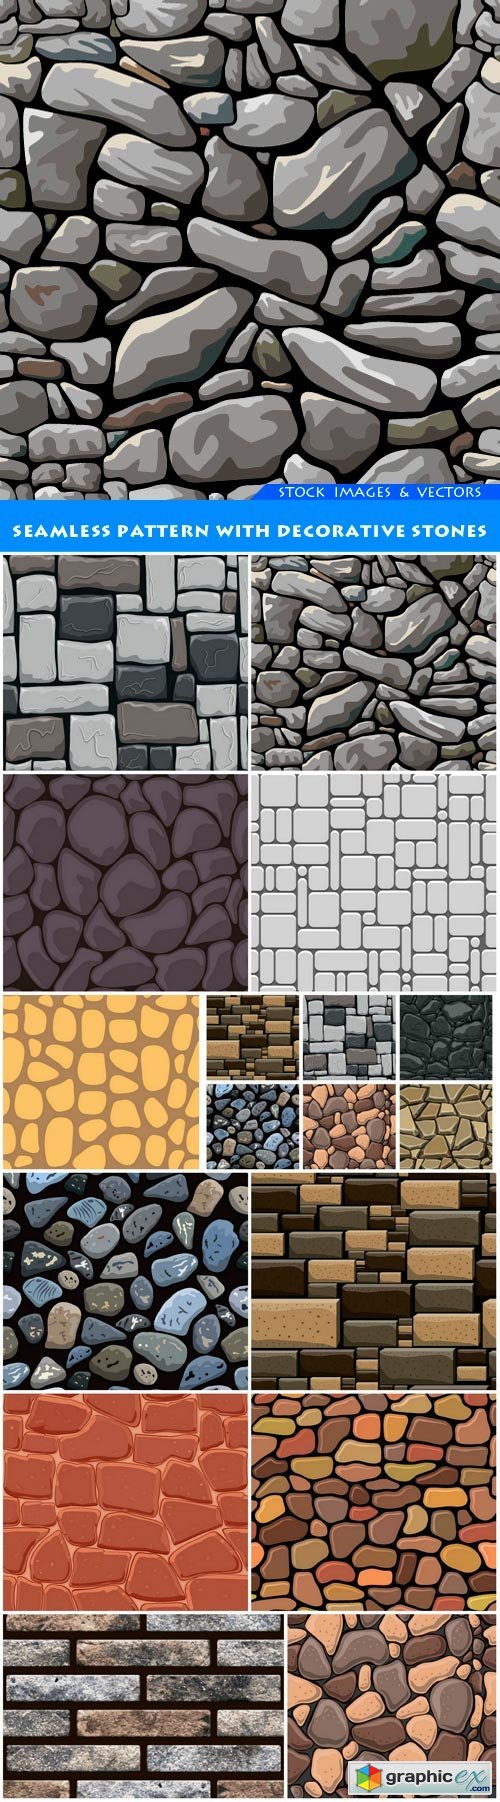 Seamless pattern with decorative stones 12X EPS